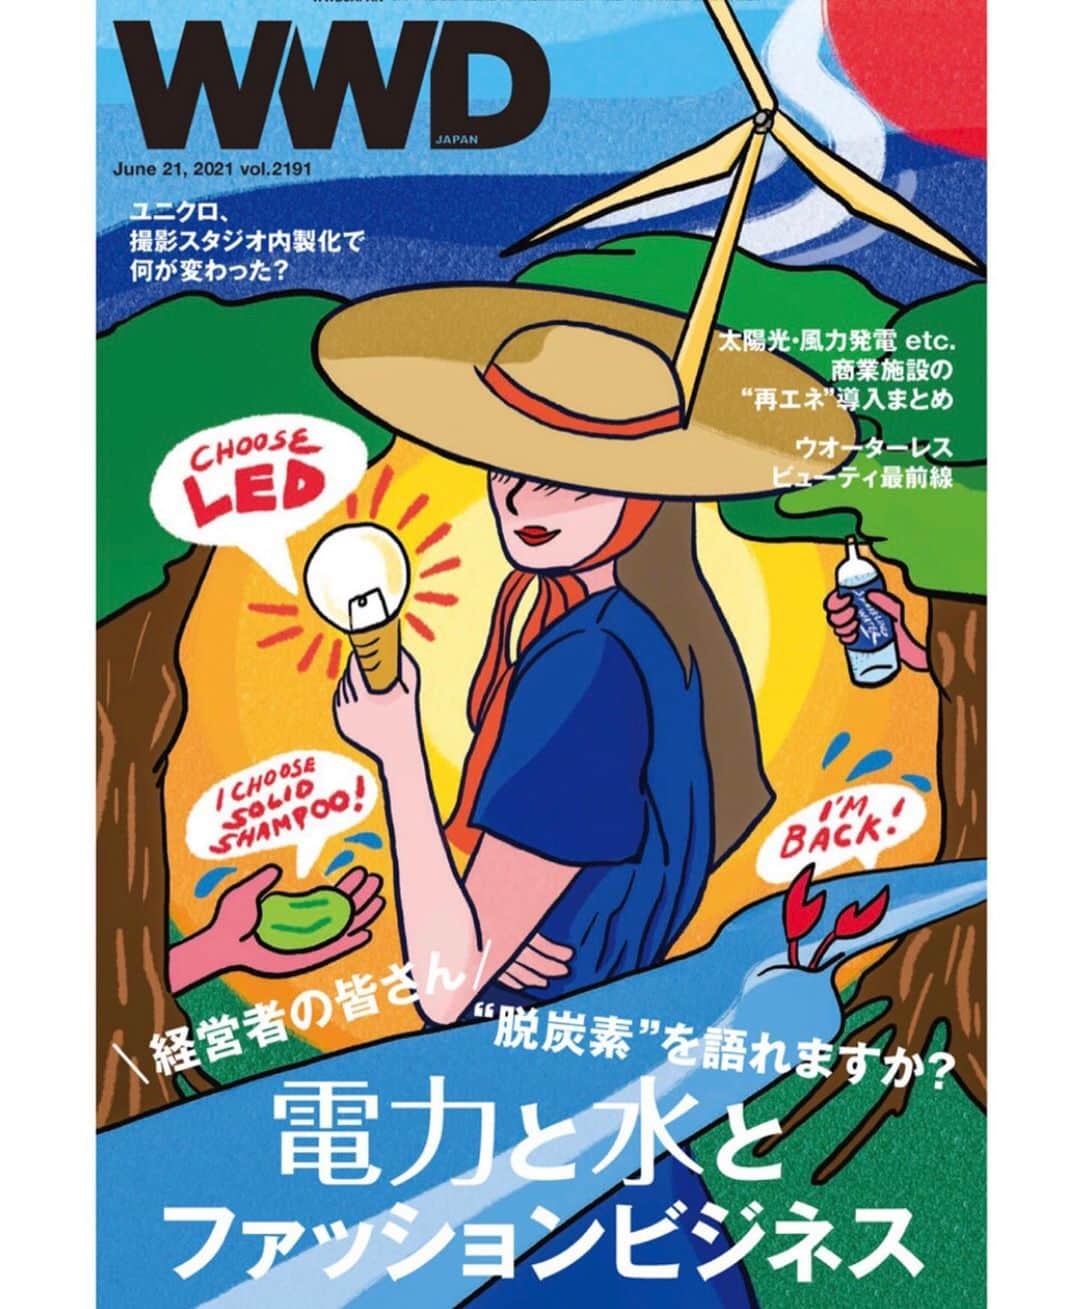 nanamyのインスタグラム：「My dream came true 😭✨🔥🔥🔥 Did a COVER illustration for @wwd_jp @wwd latest issue. Struggled so many times this whole year, but suddenly I can see the light because of everyones support. I'm so happy that my drawing power and inspiration is back 💙 ・ 1つのゴールであった紙媒体の表紙、なんと初めてご一緒にする、wwdさまに叶えていただきました😭手にとって本屋さんで自分の描いた絵をみれること、本当に感激しています。諦めずに描いていてよかった。全国の書店にて発売してます、ぜひみてみていただけたら嬉しいです💡 ・ Thank you so much @wwd_jp @yukikgh 💙 📸: My sister @nkmomoka  ・ #wwd #wwdjapan #nanamy #coverillustration #magazinecover #wwdillustration #summer #sustainable #sustainablefashion #fashion」